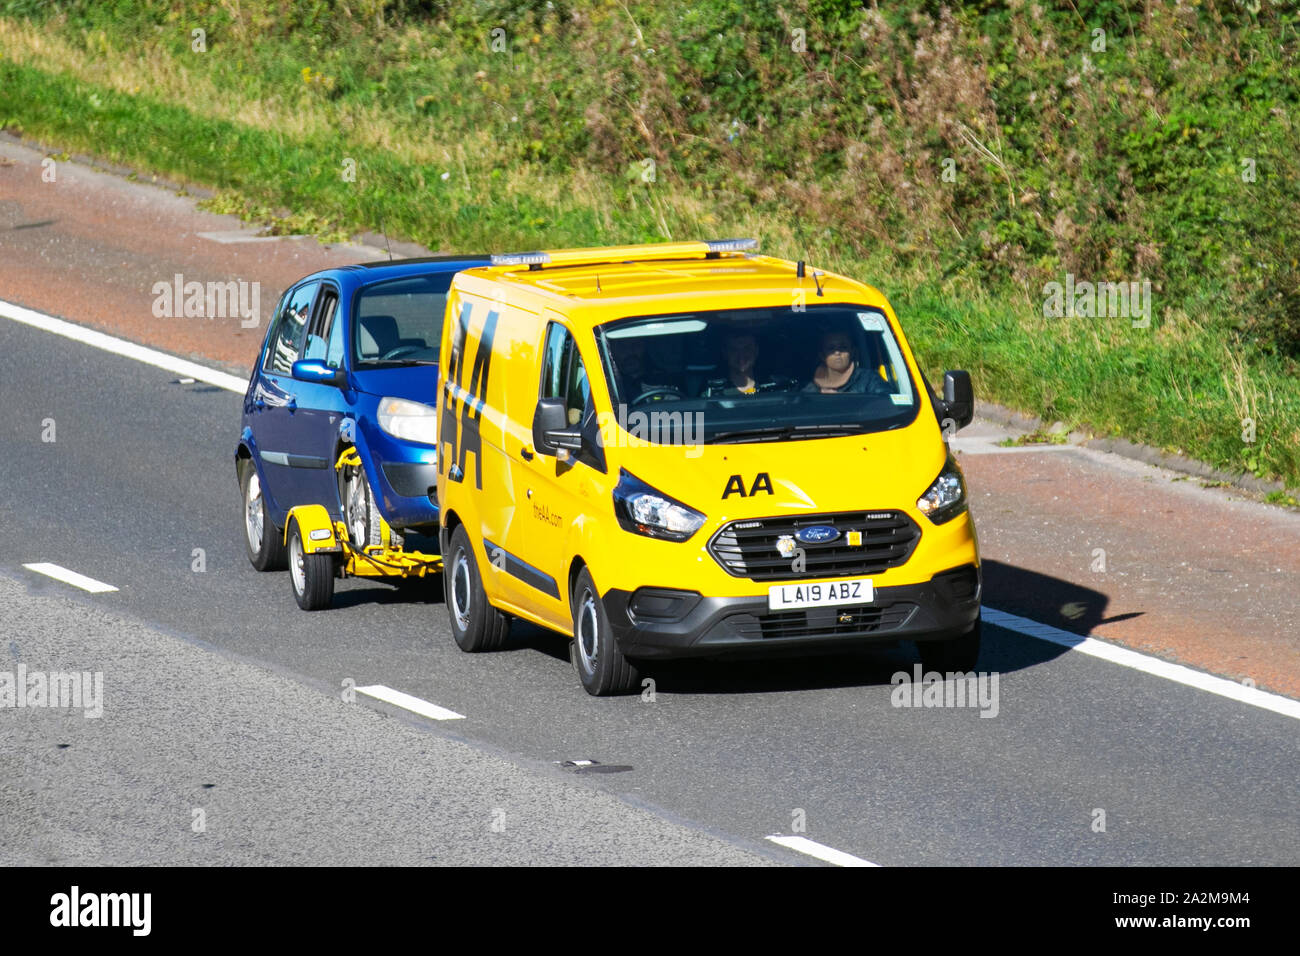 AA Van yellow 24hr recovery truck, Ford Transit Custom 340 Base carrying broken down vehicle. Side view of rescue breakdown recovery vehicle transporting blue small family car along M6, Lancaster, UK; Vehicular traffic, transport, modern, north-bound on the 3 lane highway. Stock Photo